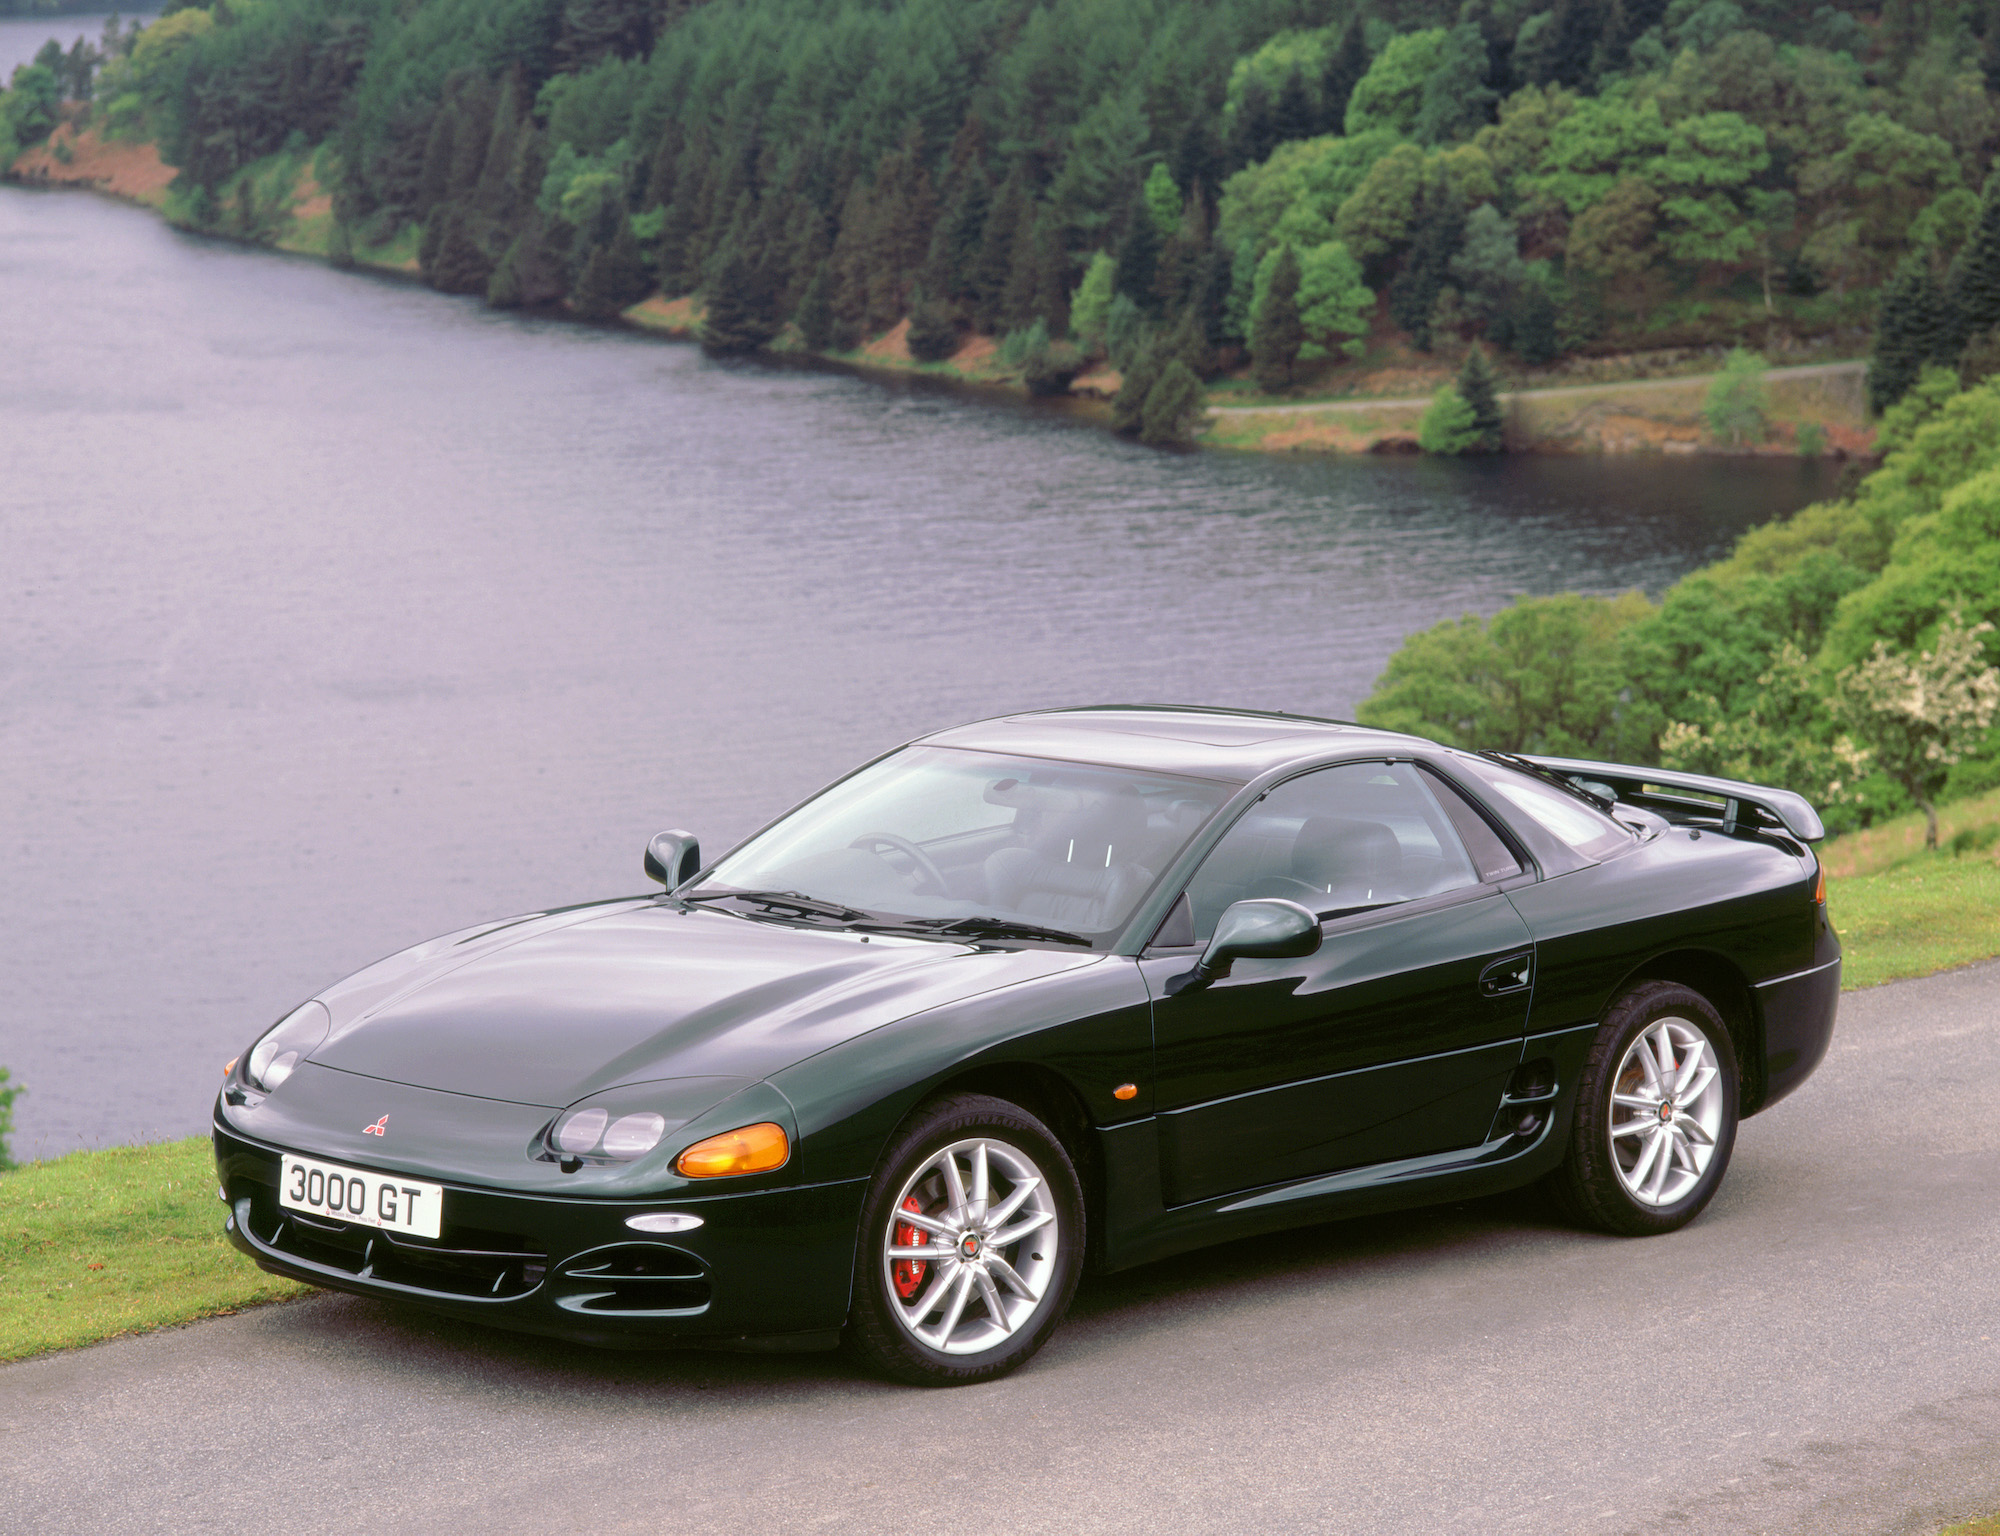 What Was So Bad About the 1999 Mitsubishi 3000GT That 'Fast & Furious'  Scrapped It?